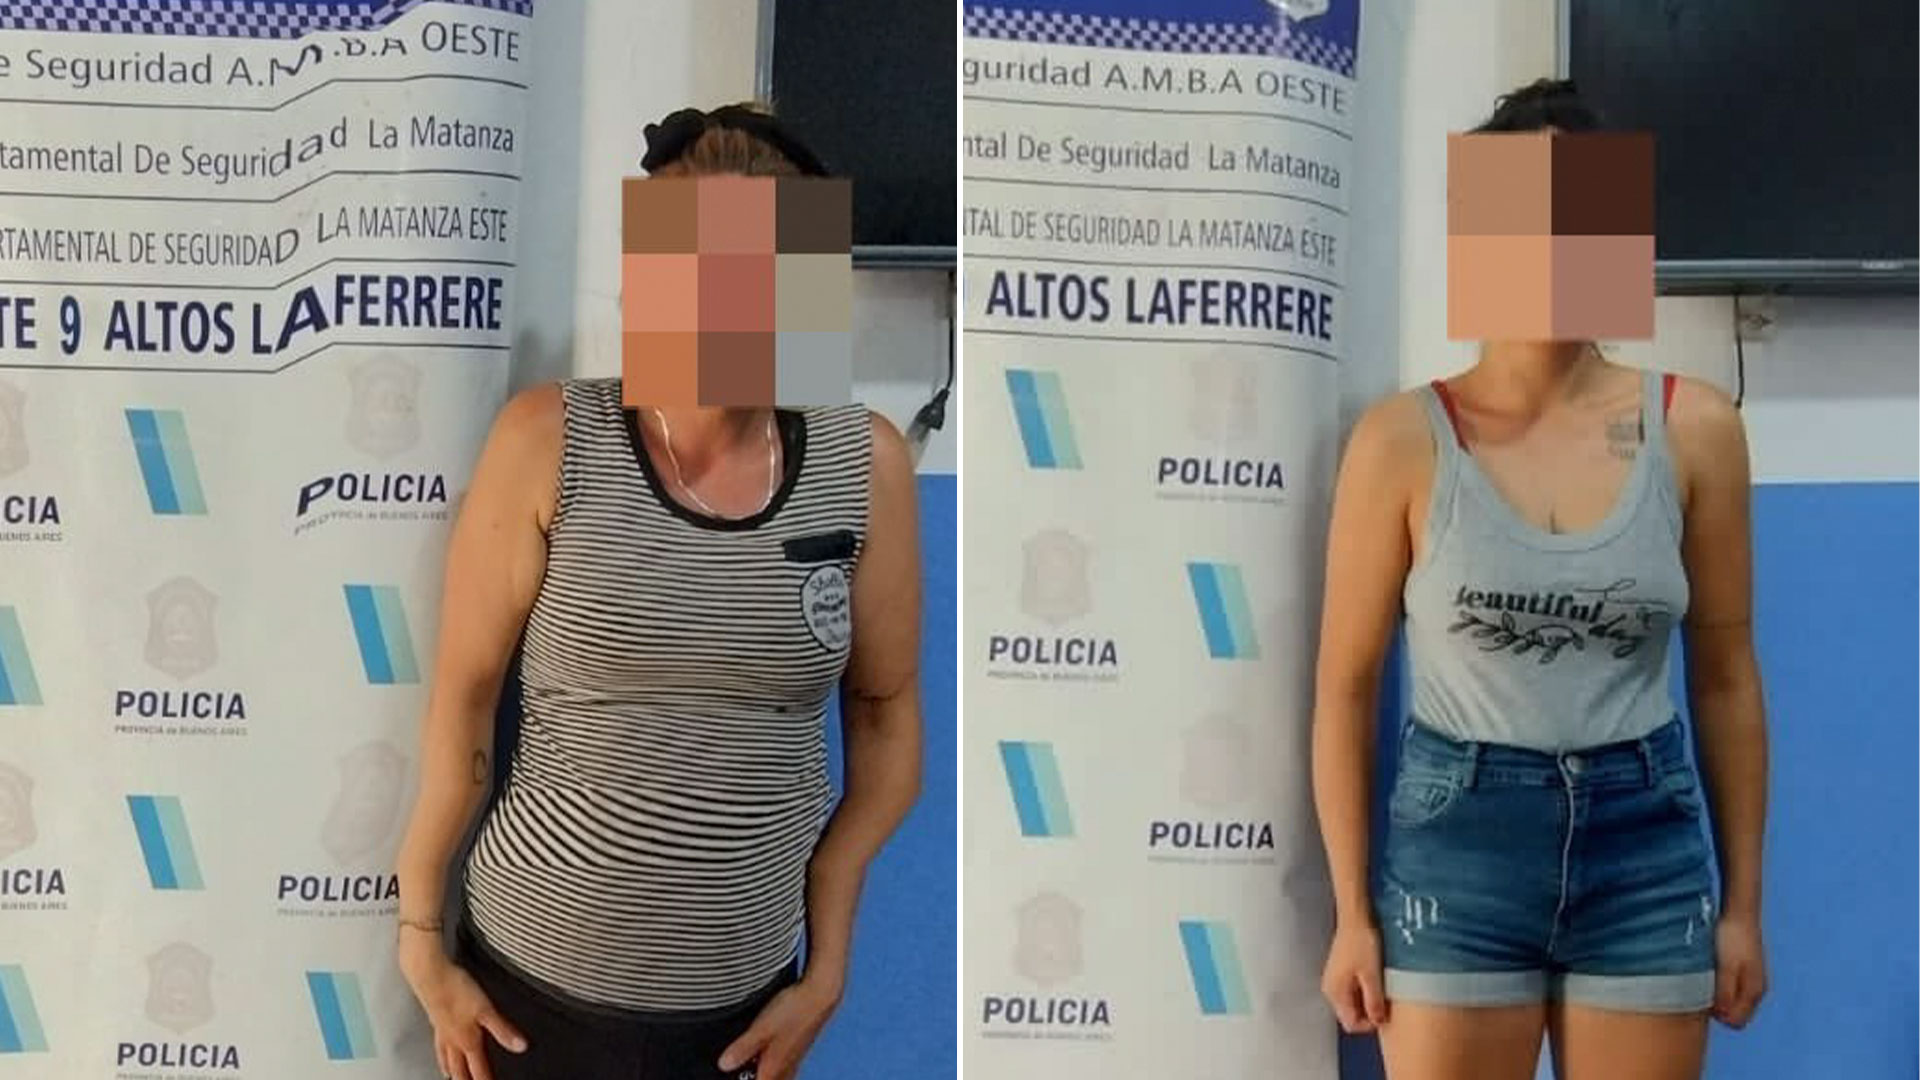 The women arrested in the framework of the investigation of the theft of the baby